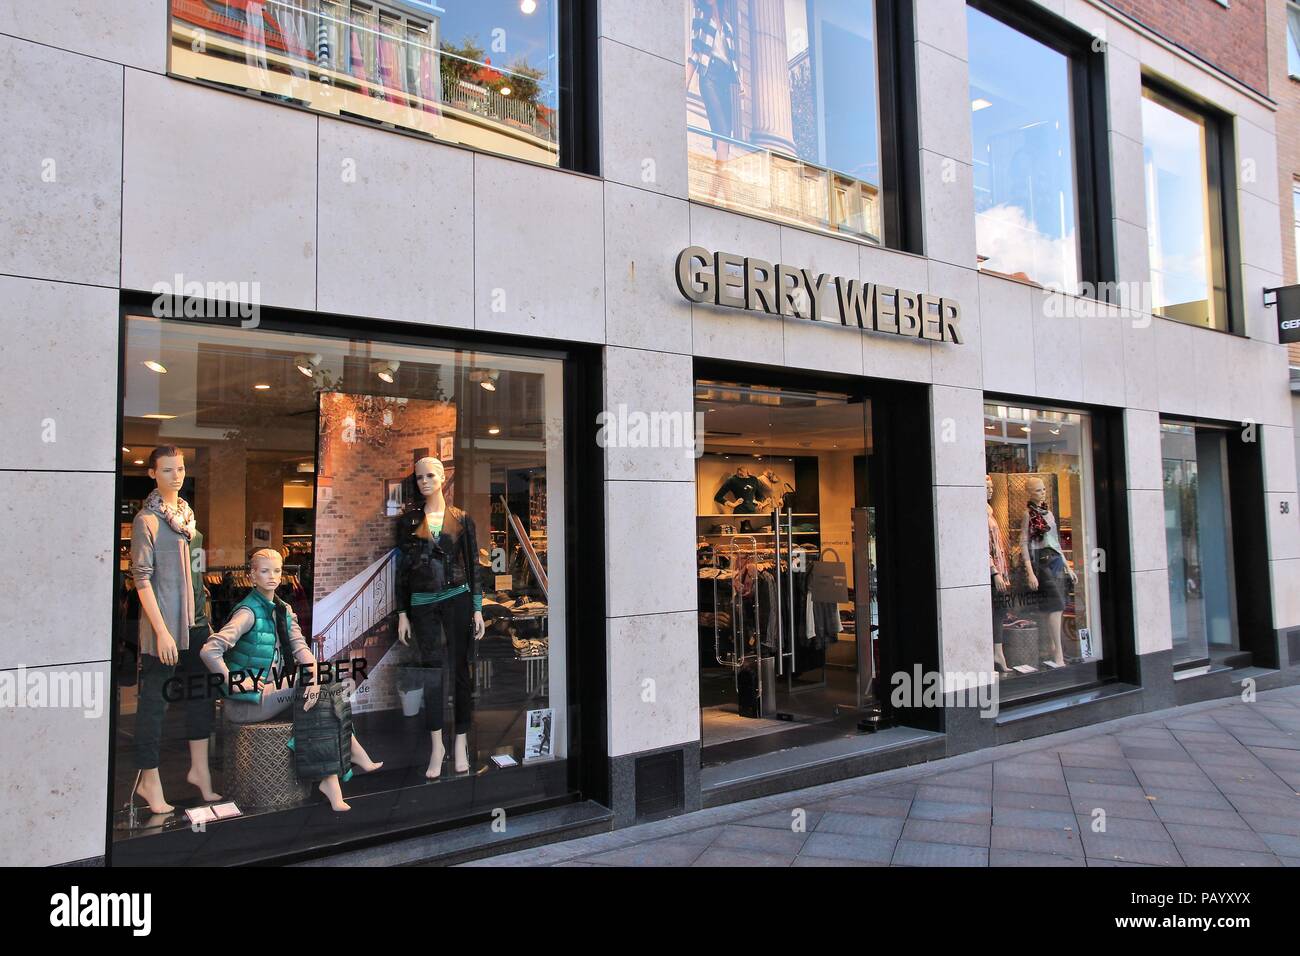 Gerry weber hi-res stock photography and images - Alamy